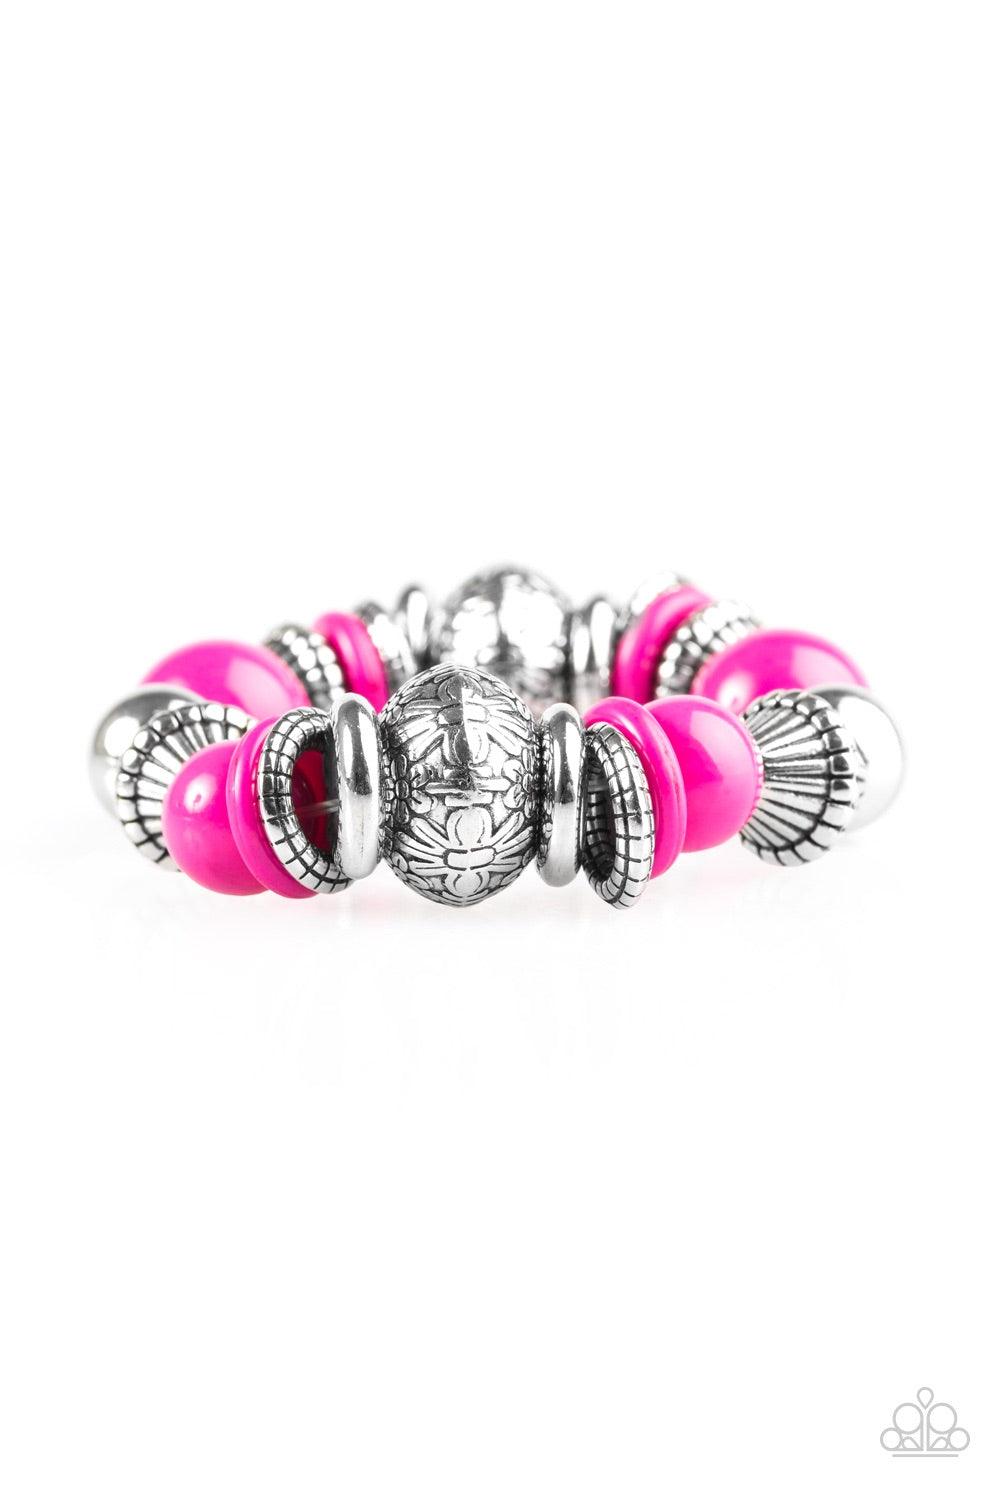 Paparazzi Accessories Seize The Season - Pink Embossed in a whimsical floral pattern, chunky silver beads, mismatched silver accents, and vivacious pink beads are threaded along an elastic stretchy band for a seasonal look. Jewelry